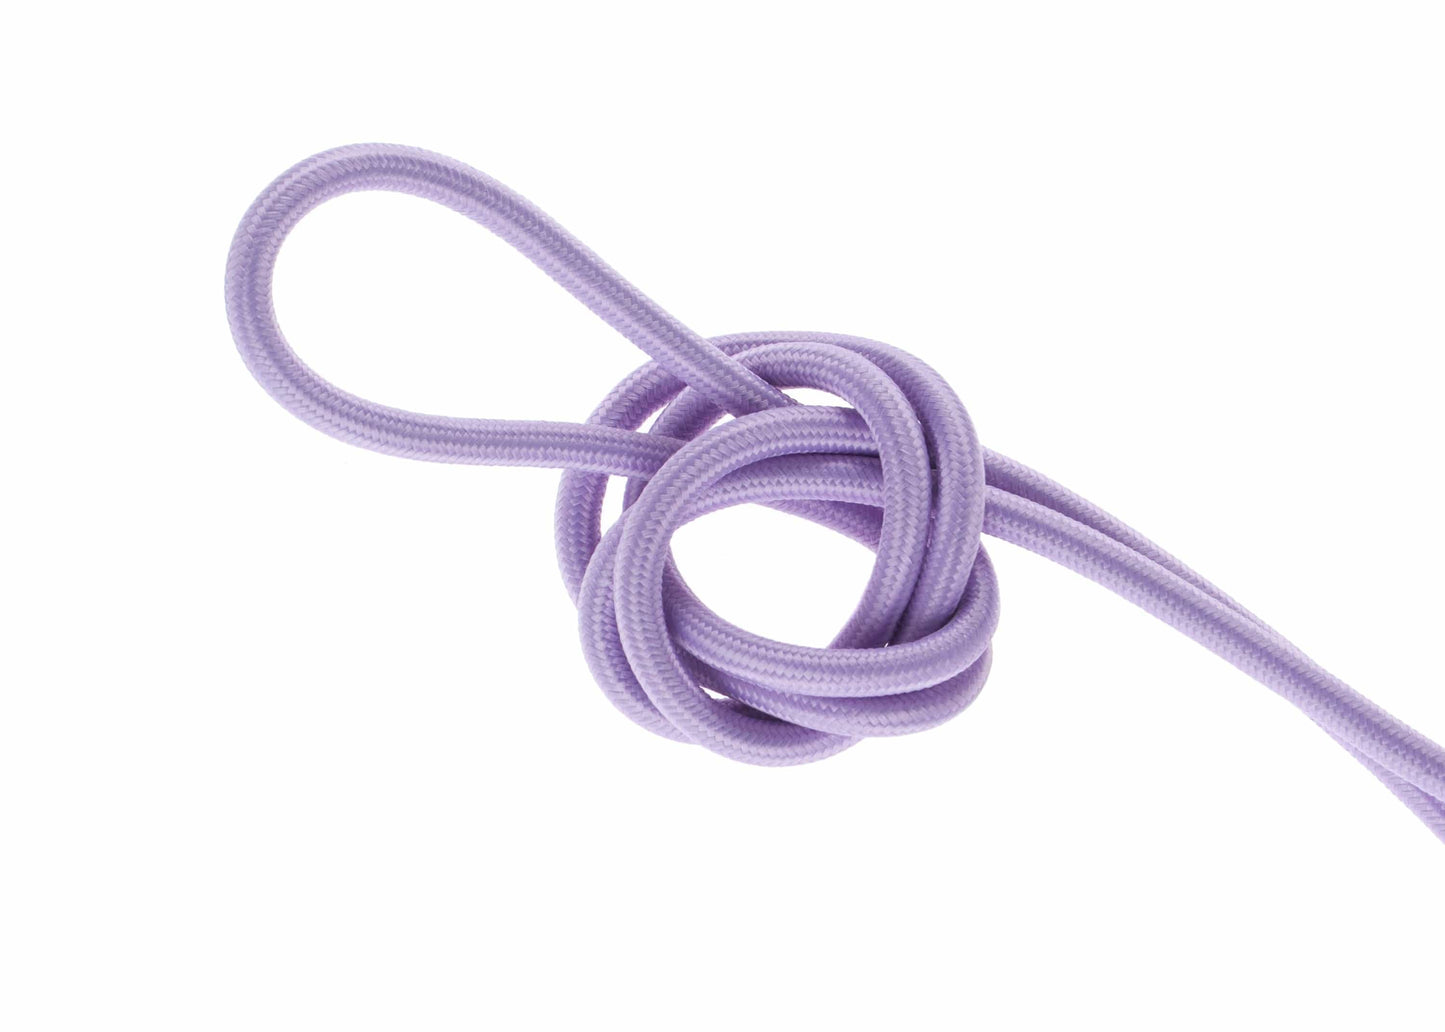 DIY Fabric Wire by the Foot - Lilac